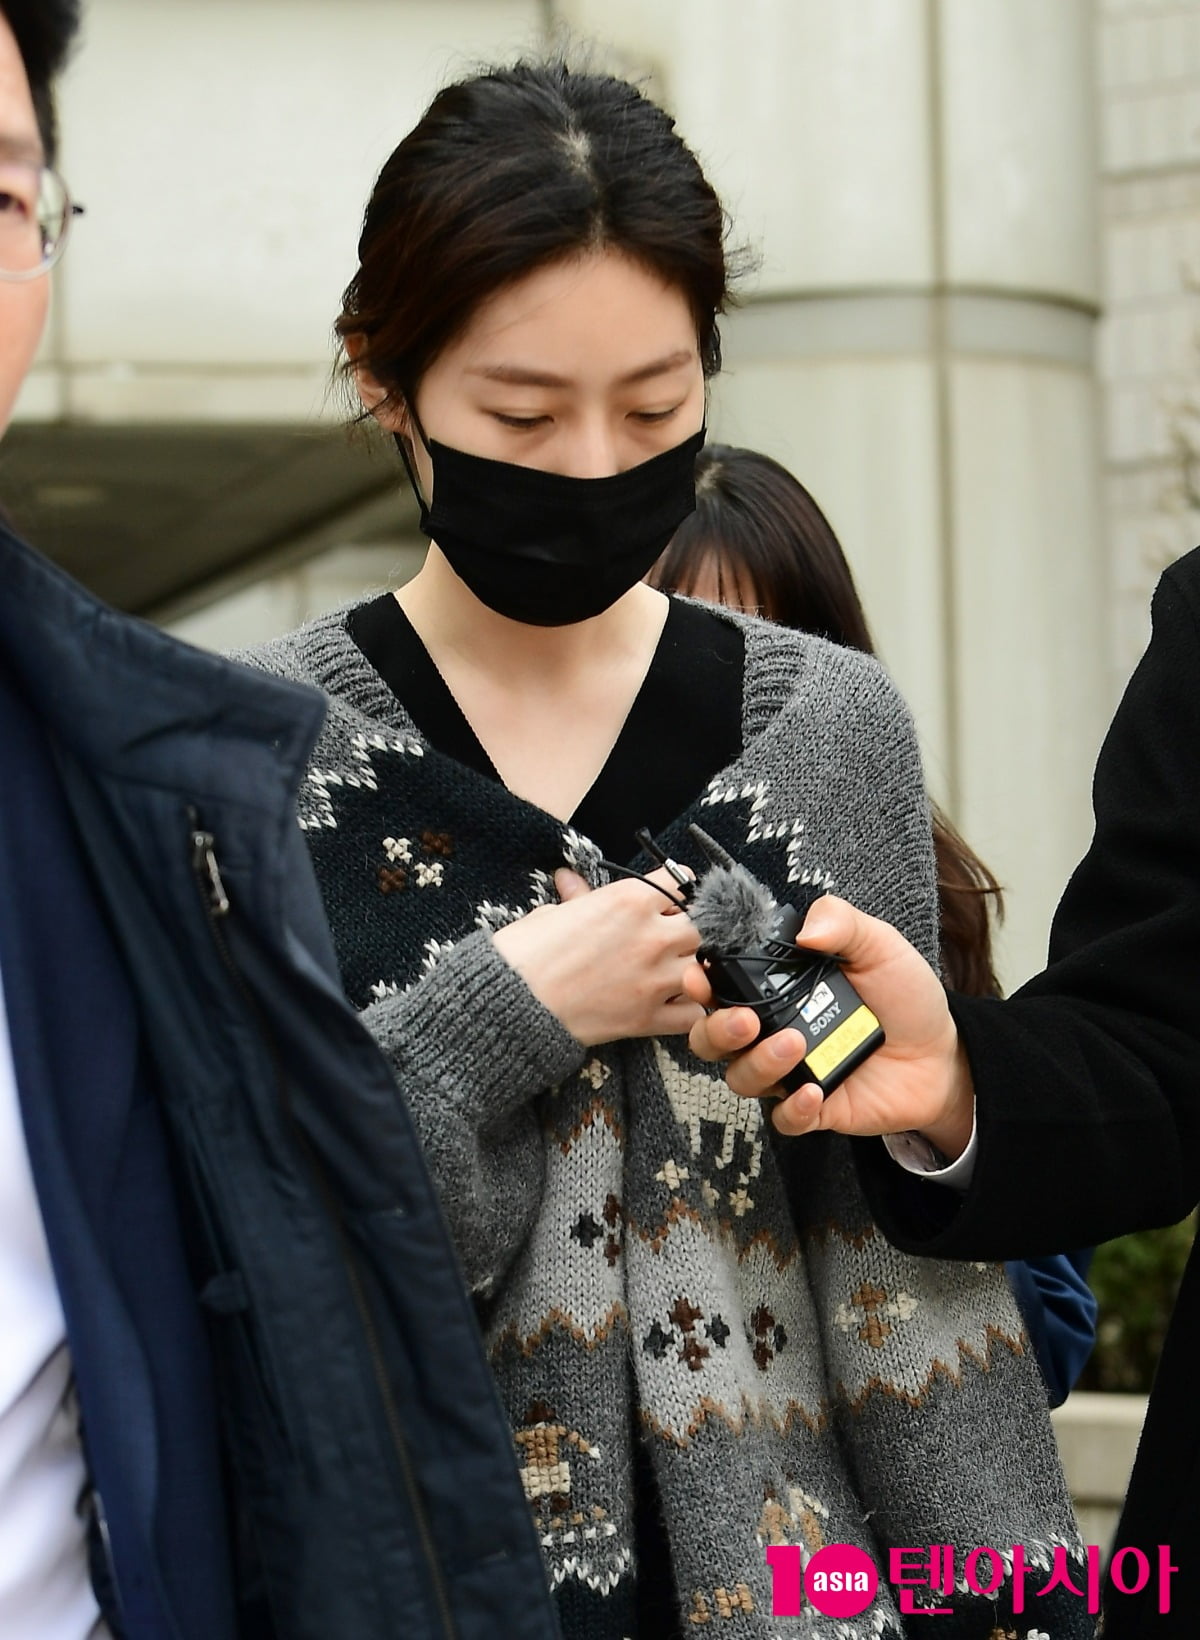 Kim Sae-ron, who was caught driving under the influence, resumes her acting career